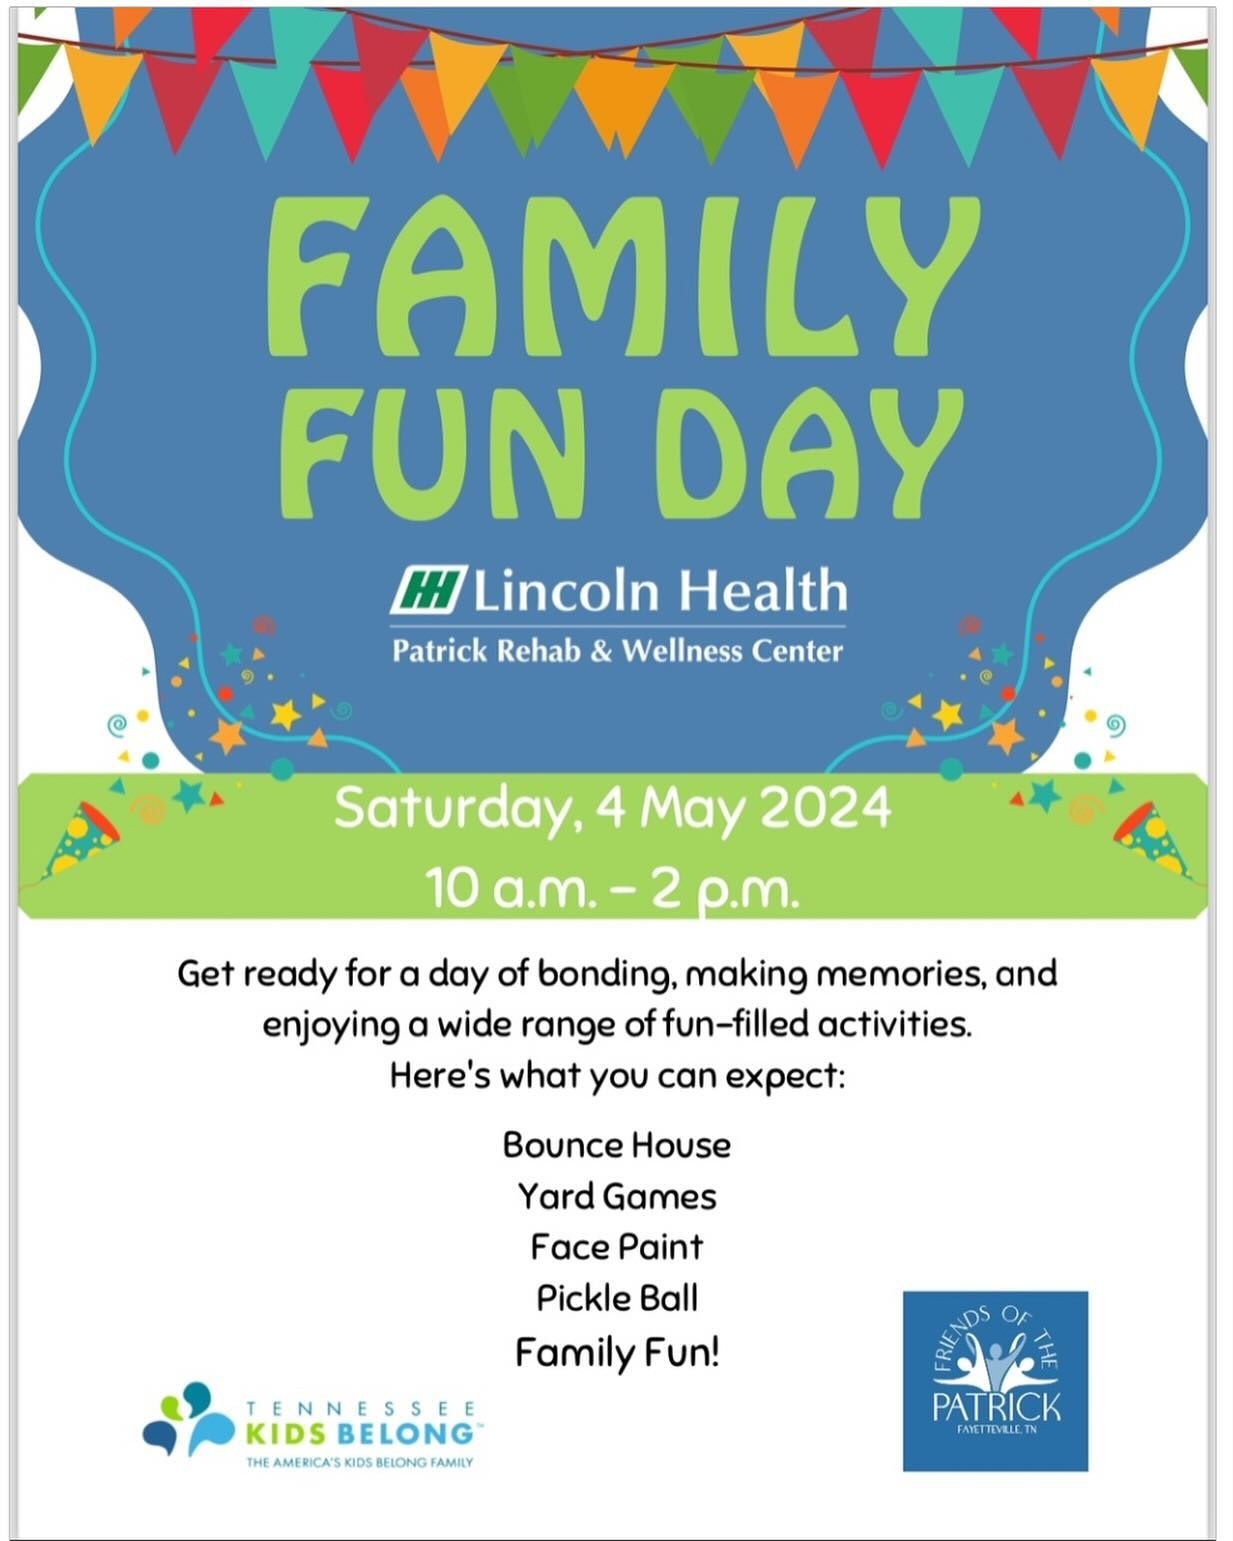 Join us for a Family Fun day at the Patrick Rehab &amp; Wellness Center!! This event is focused on giving local foster families a fun day! We are excited for this event and hope that you are as well! 

Please help us share the event!!